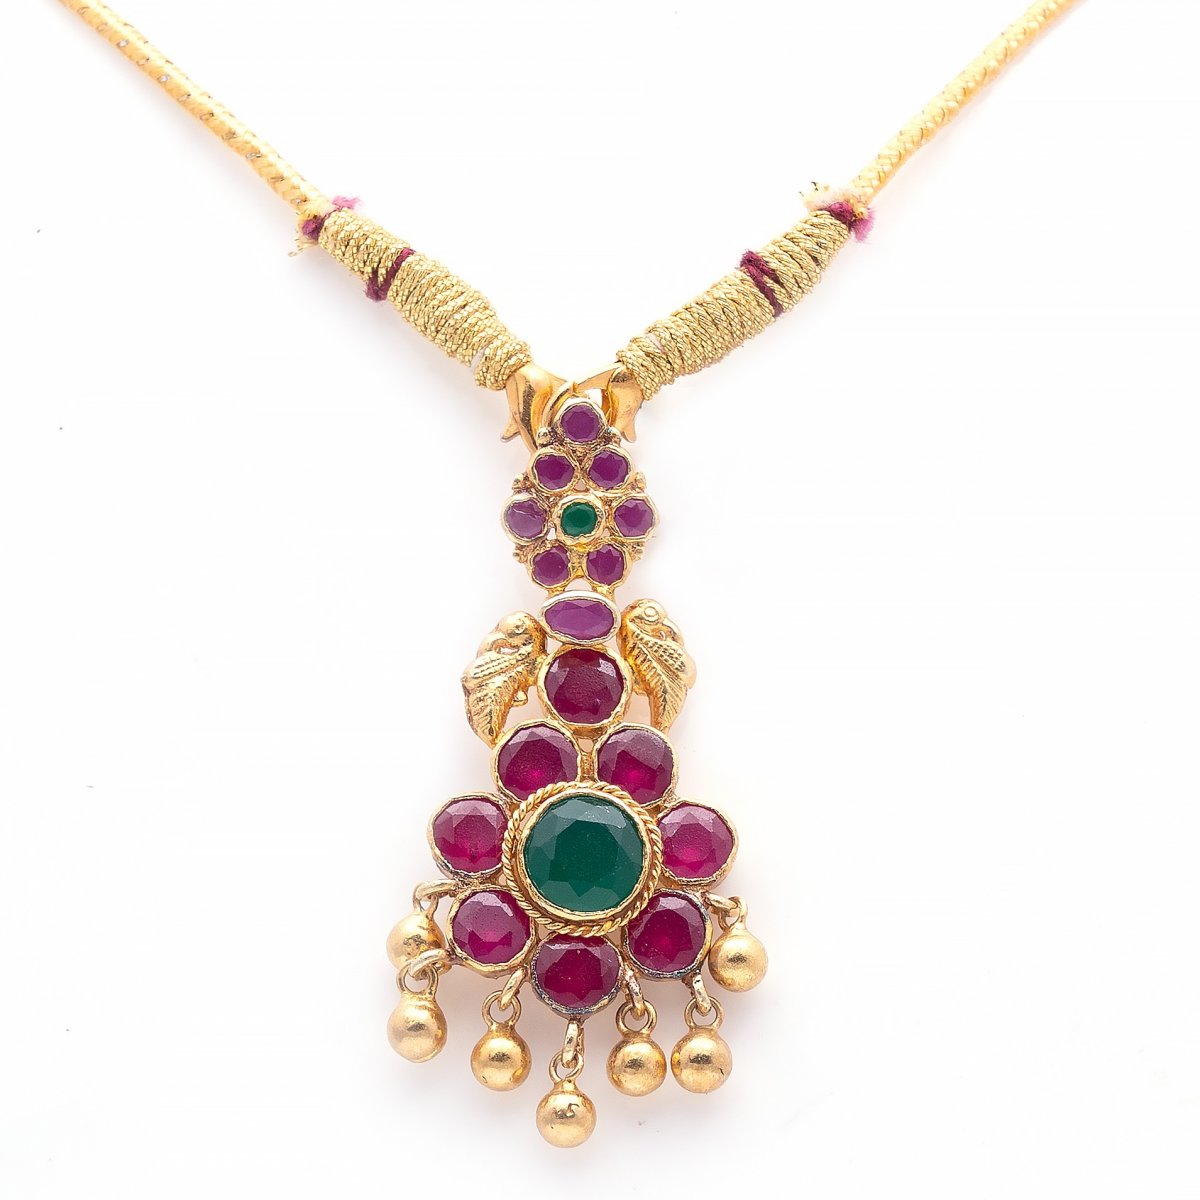 GOLD POLISHED SPINAL PENDANT FOR WOMEN AND GIRLS